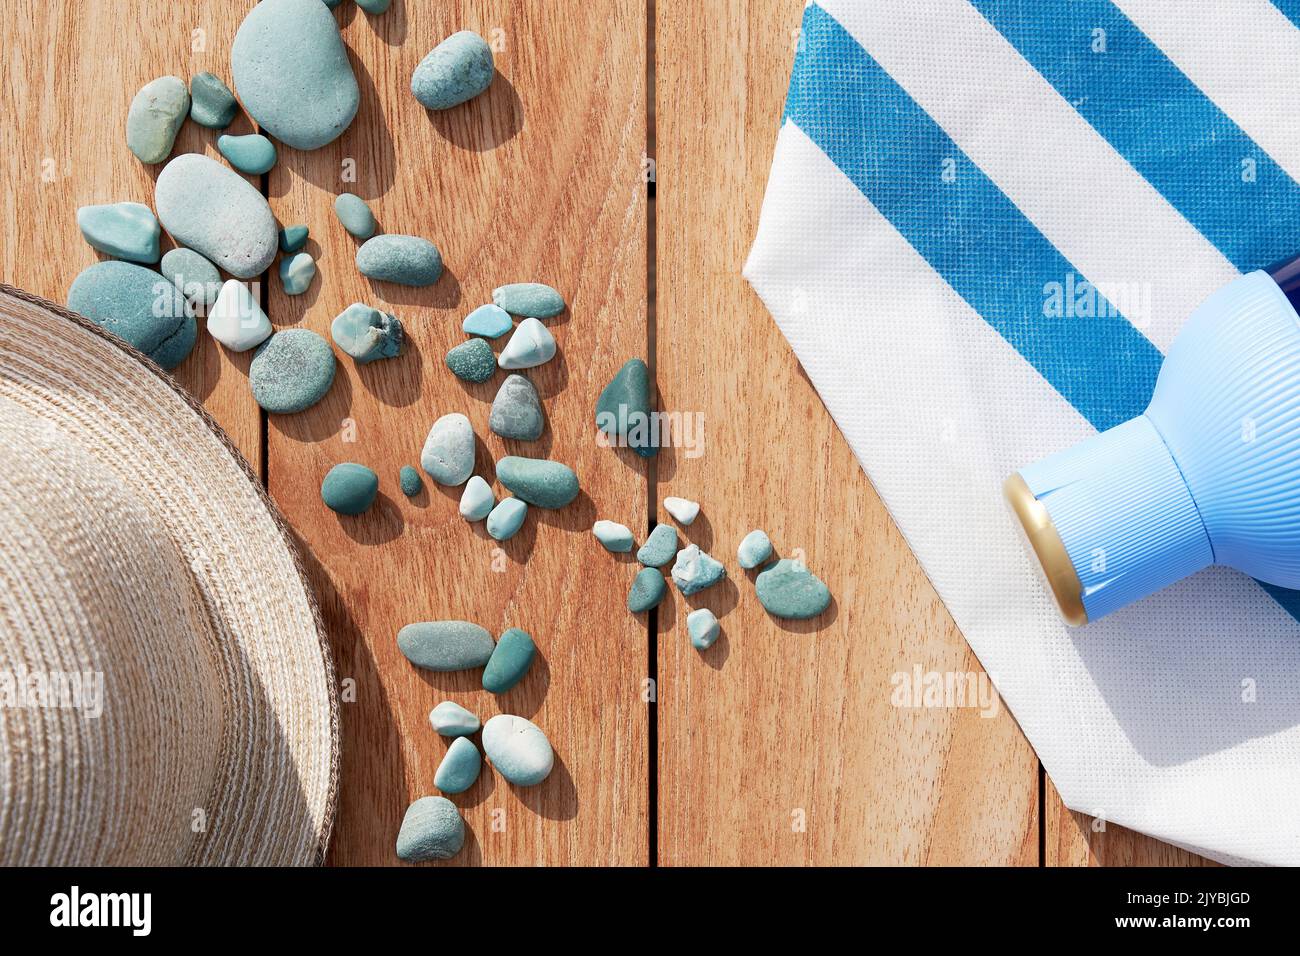 Beach accessories with vintage hat, cream bottle and sea pebbles on the wooden table. Summer beach accessories. Copy space for text Stock Photo